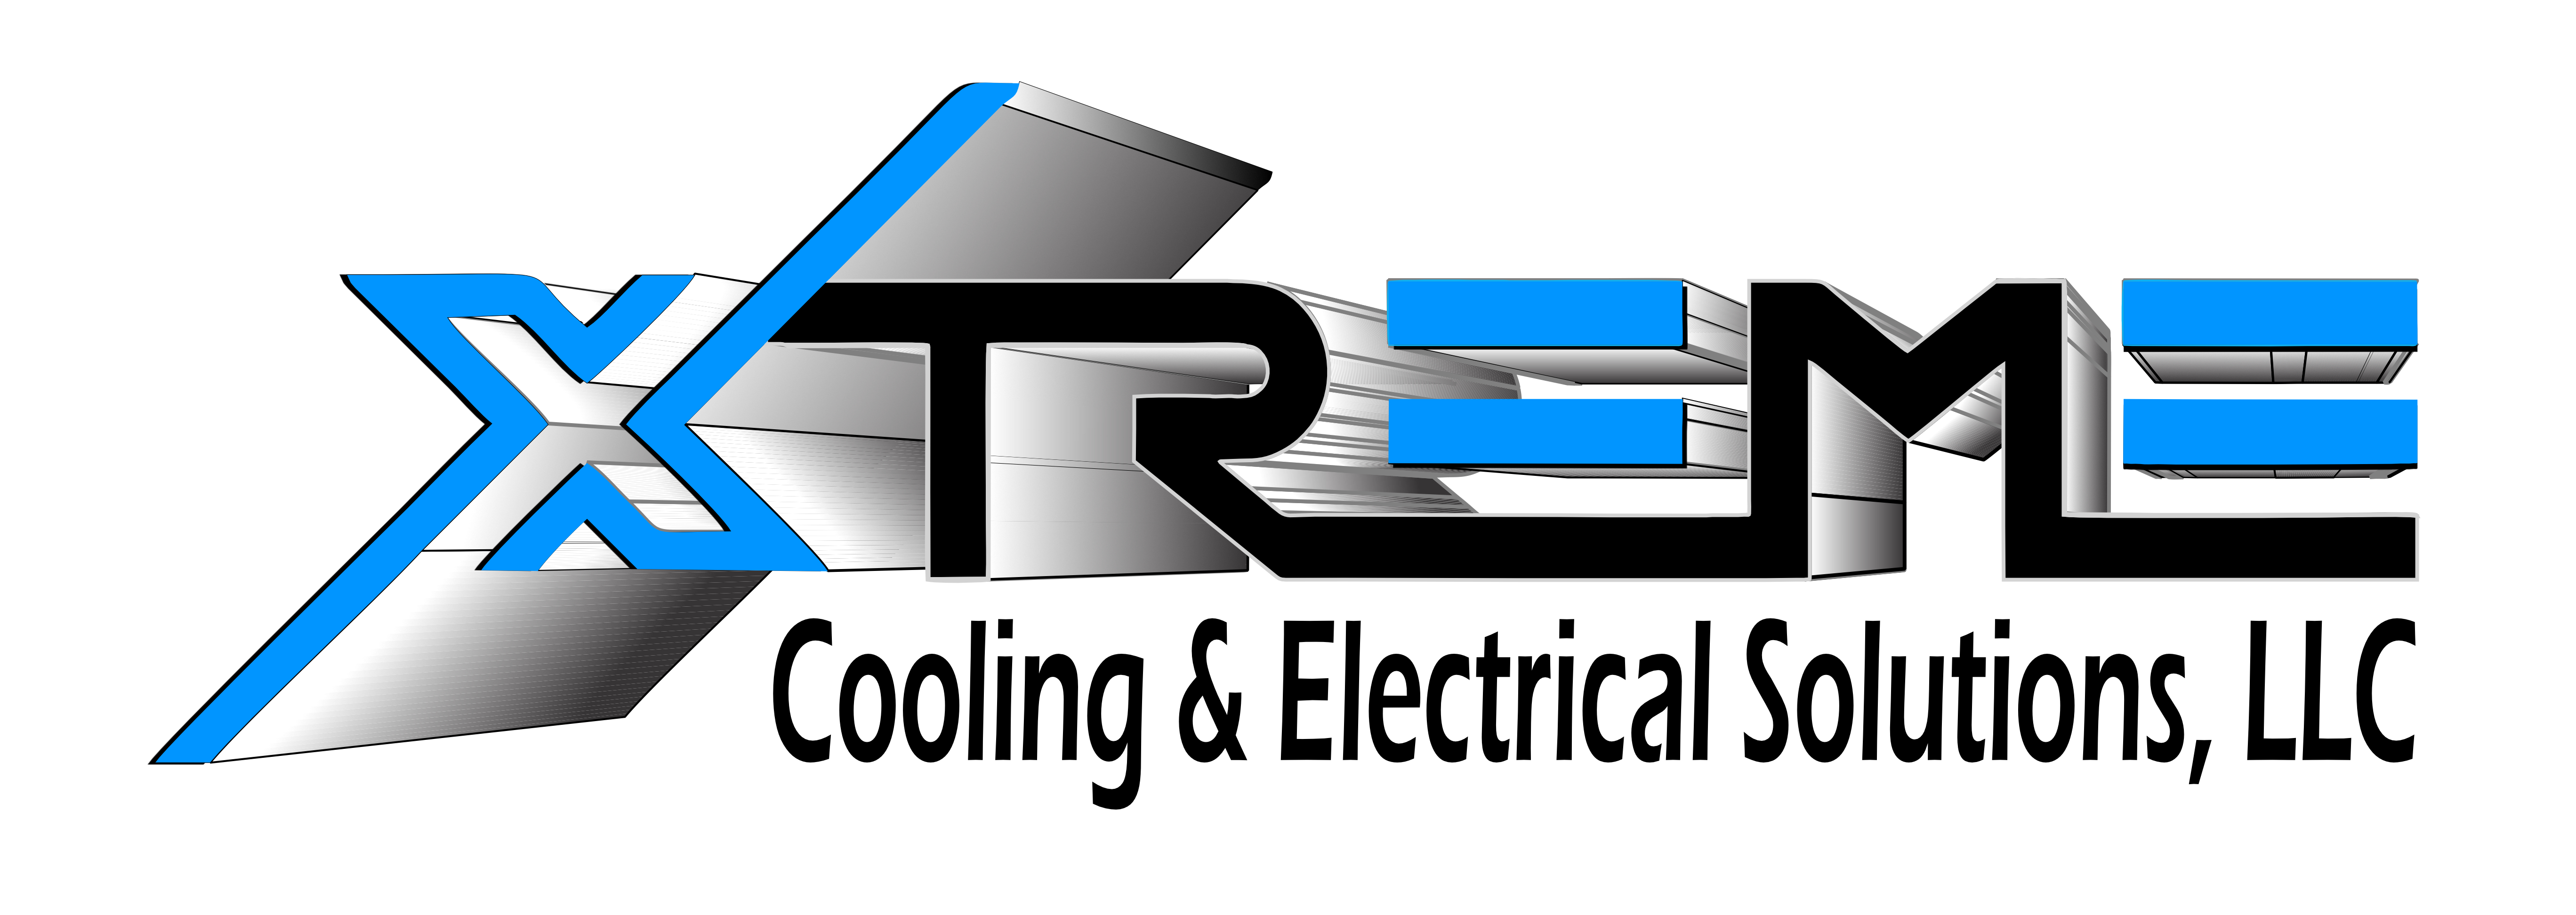 XTREME COOLING & ELECTRICAL SOLUTIONS, LLC